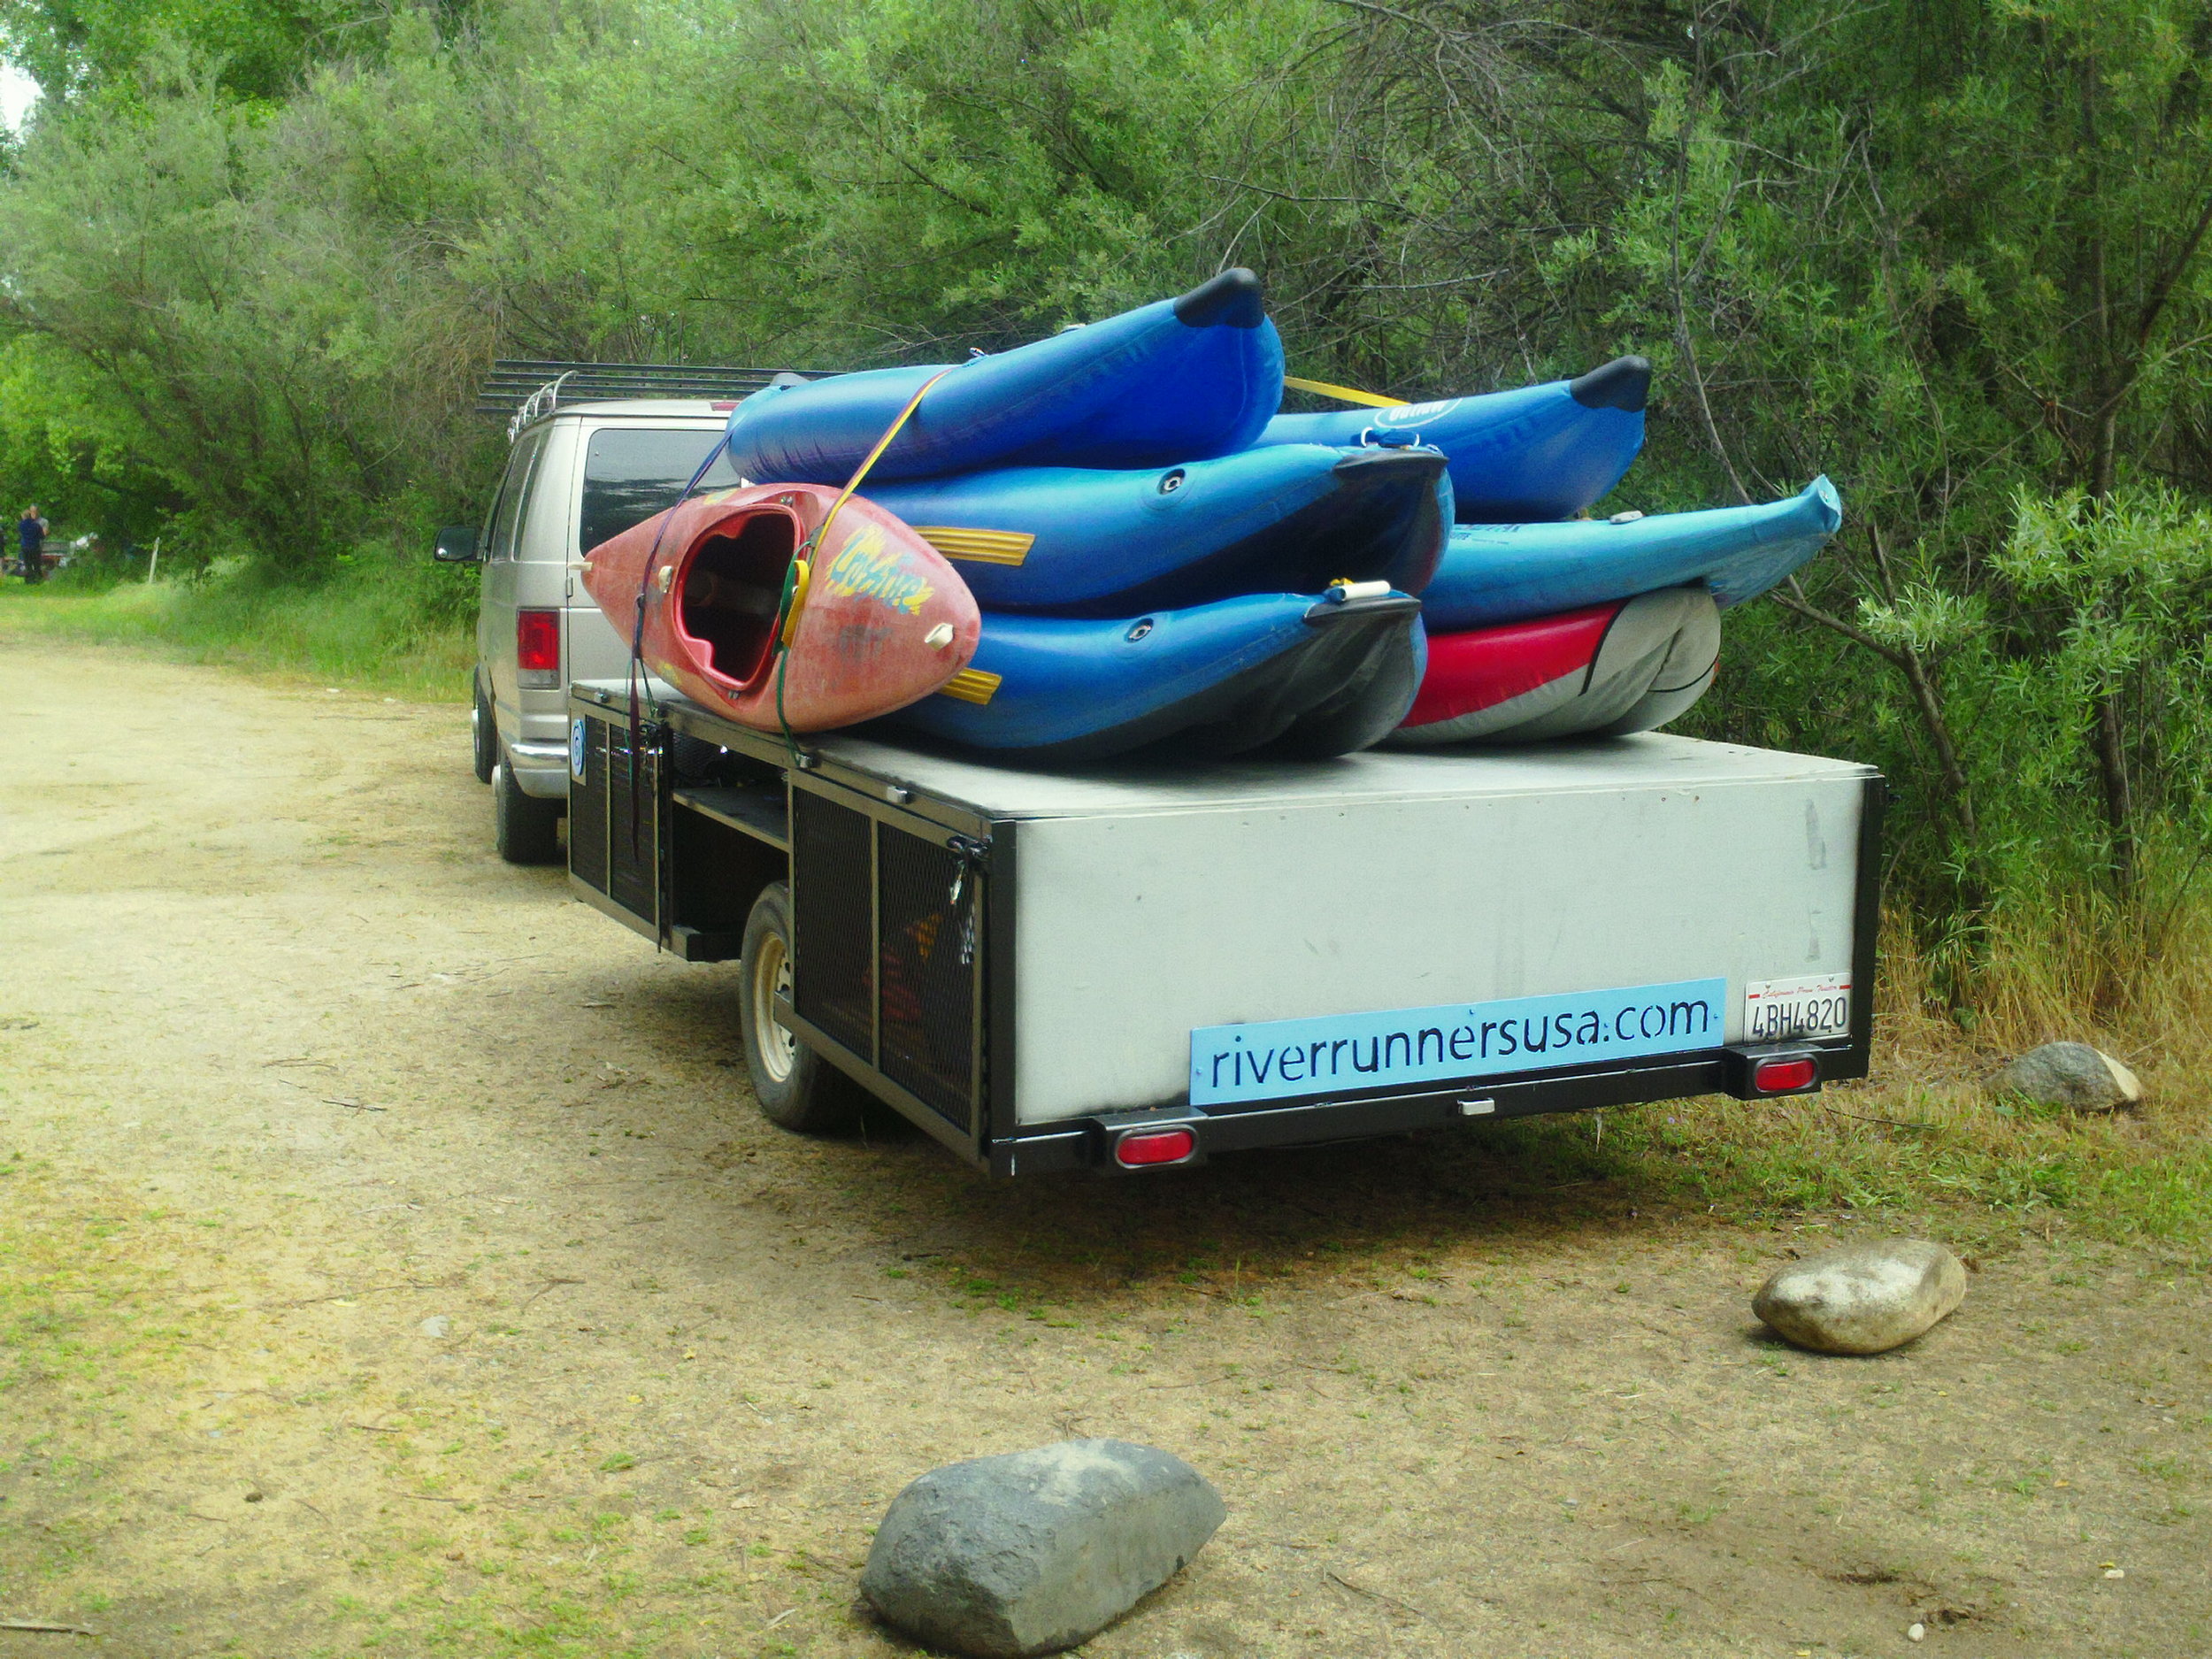 Ready to kayak the South Fork